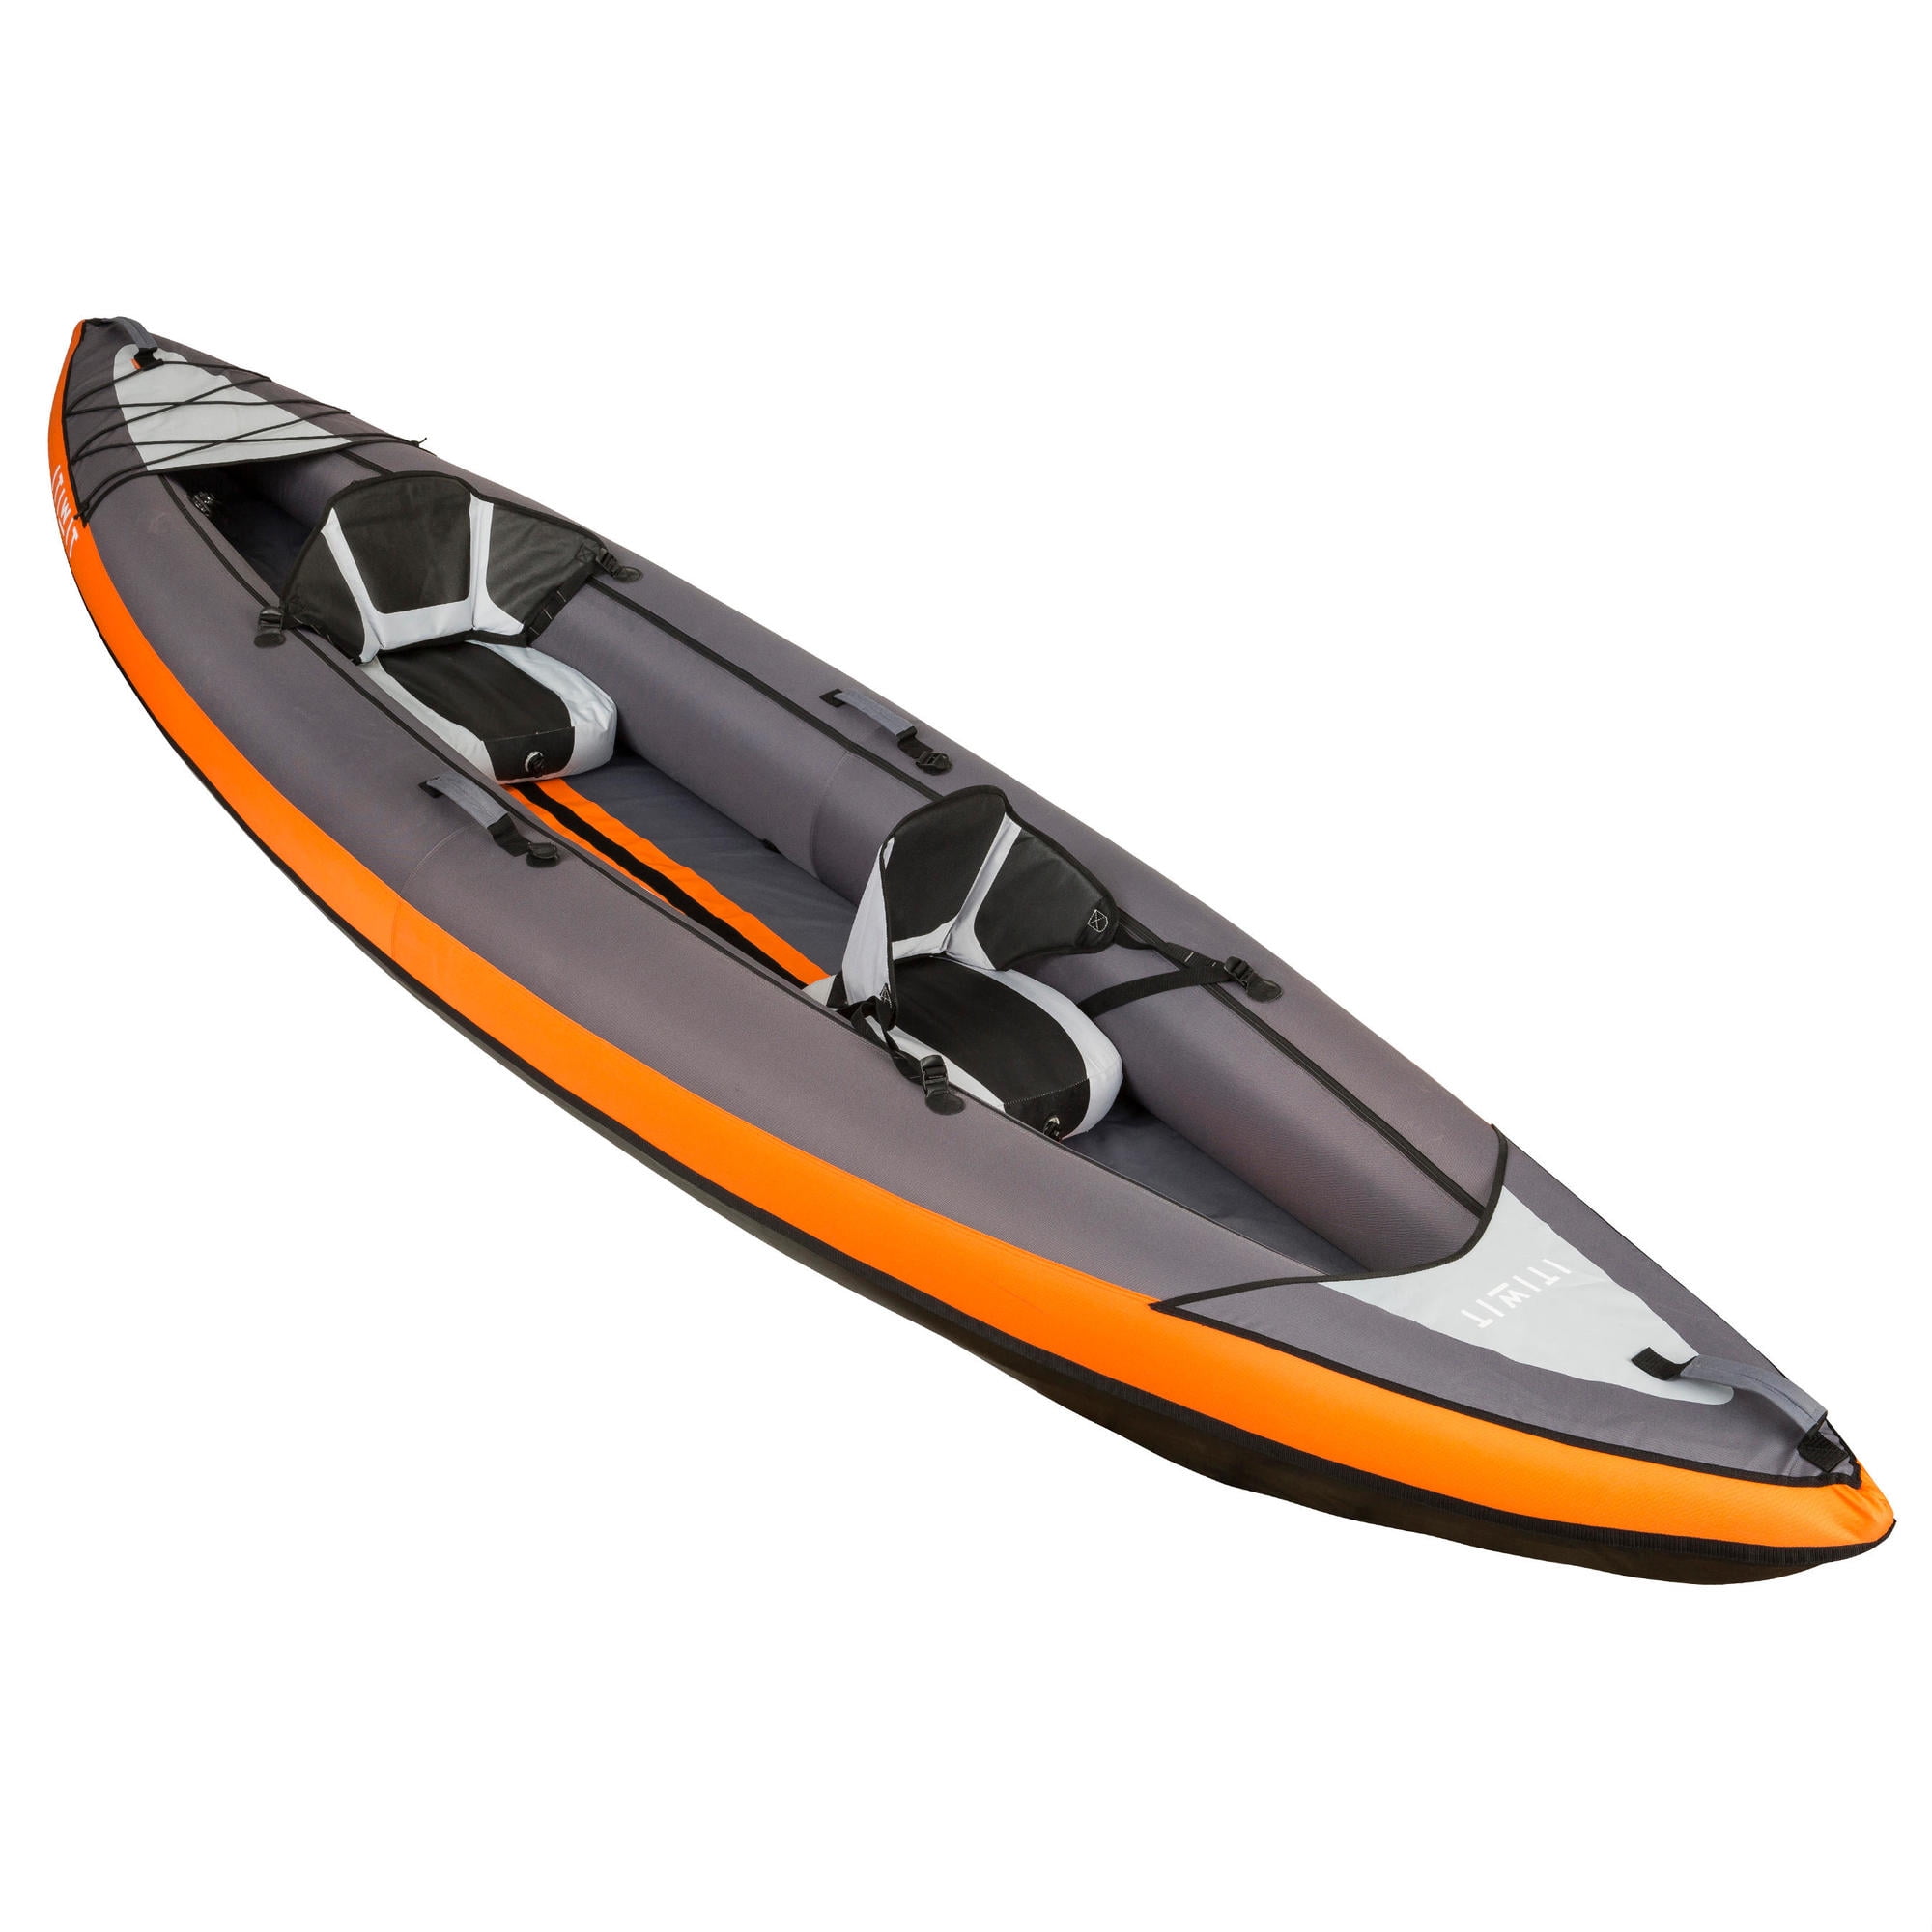 Itiwit by DECATHLON - Itiwit Inflatable 